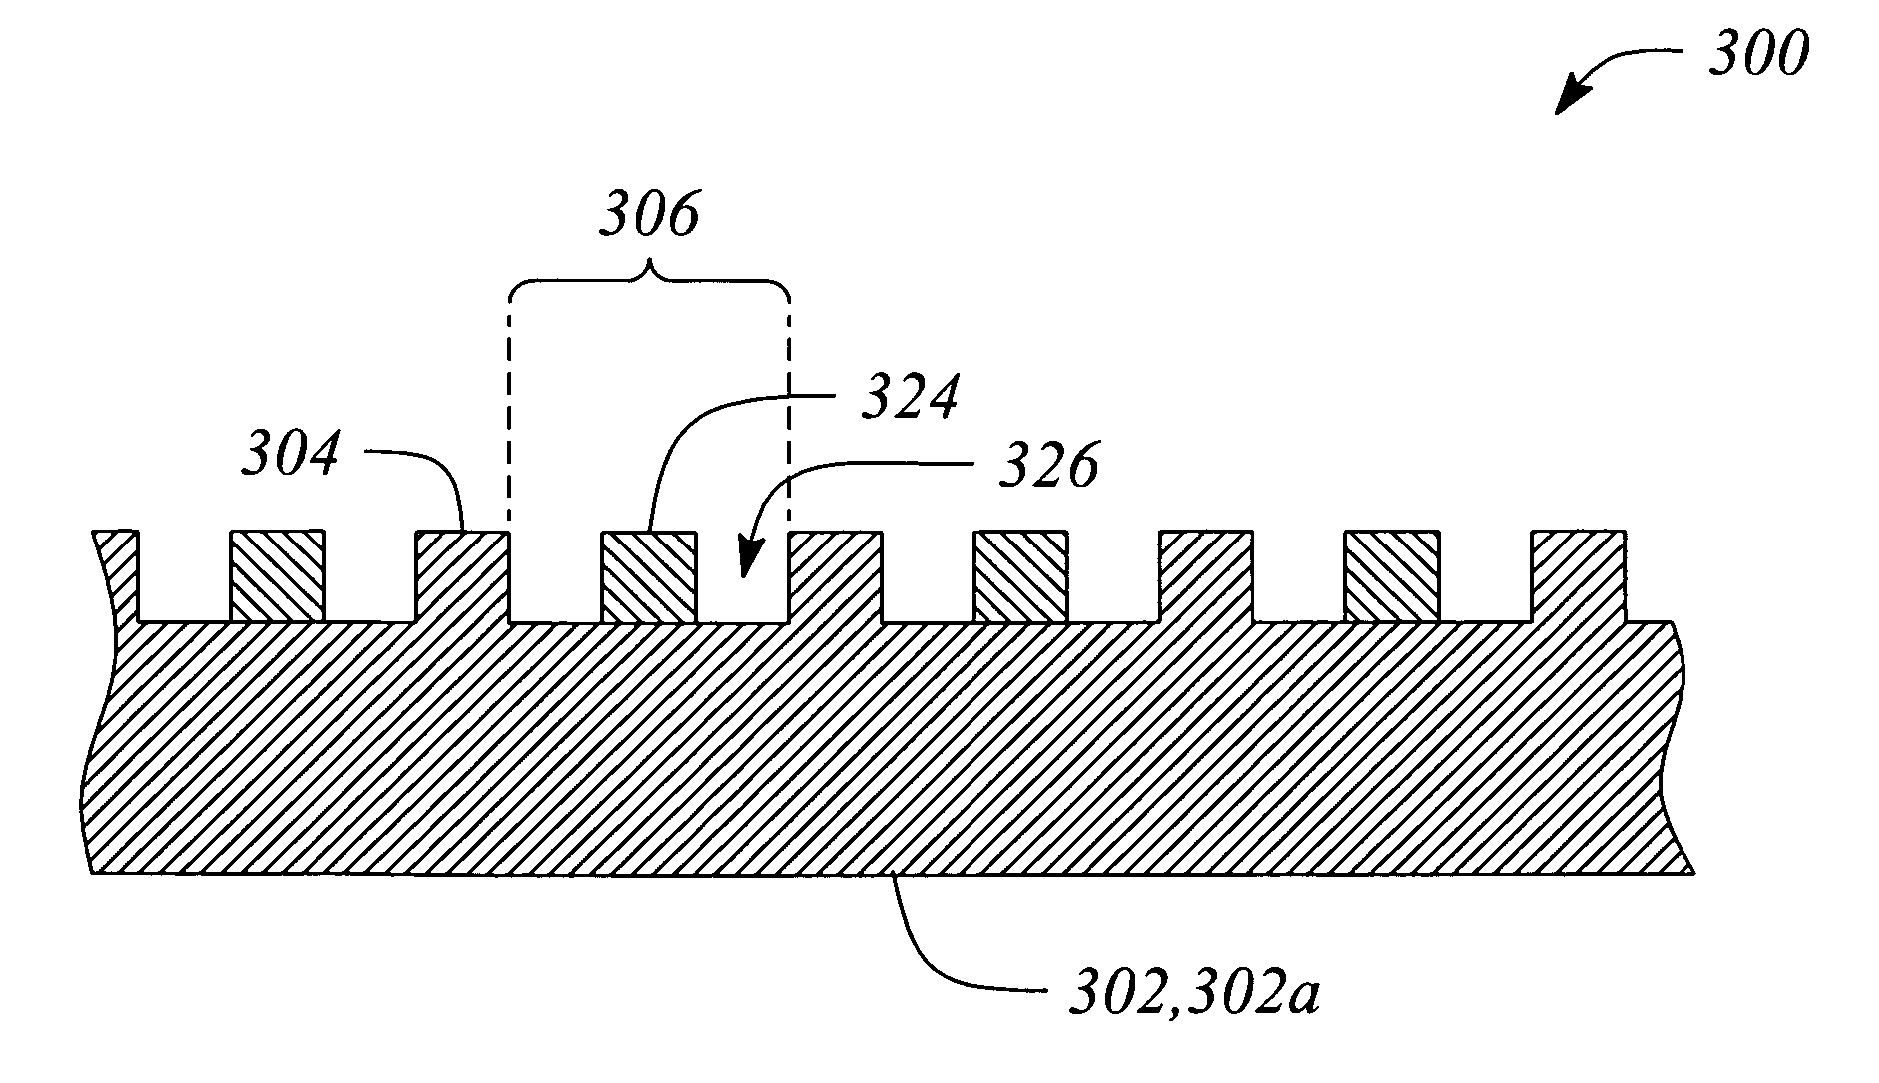 Reduction of a feature dimension in a nano-scale device